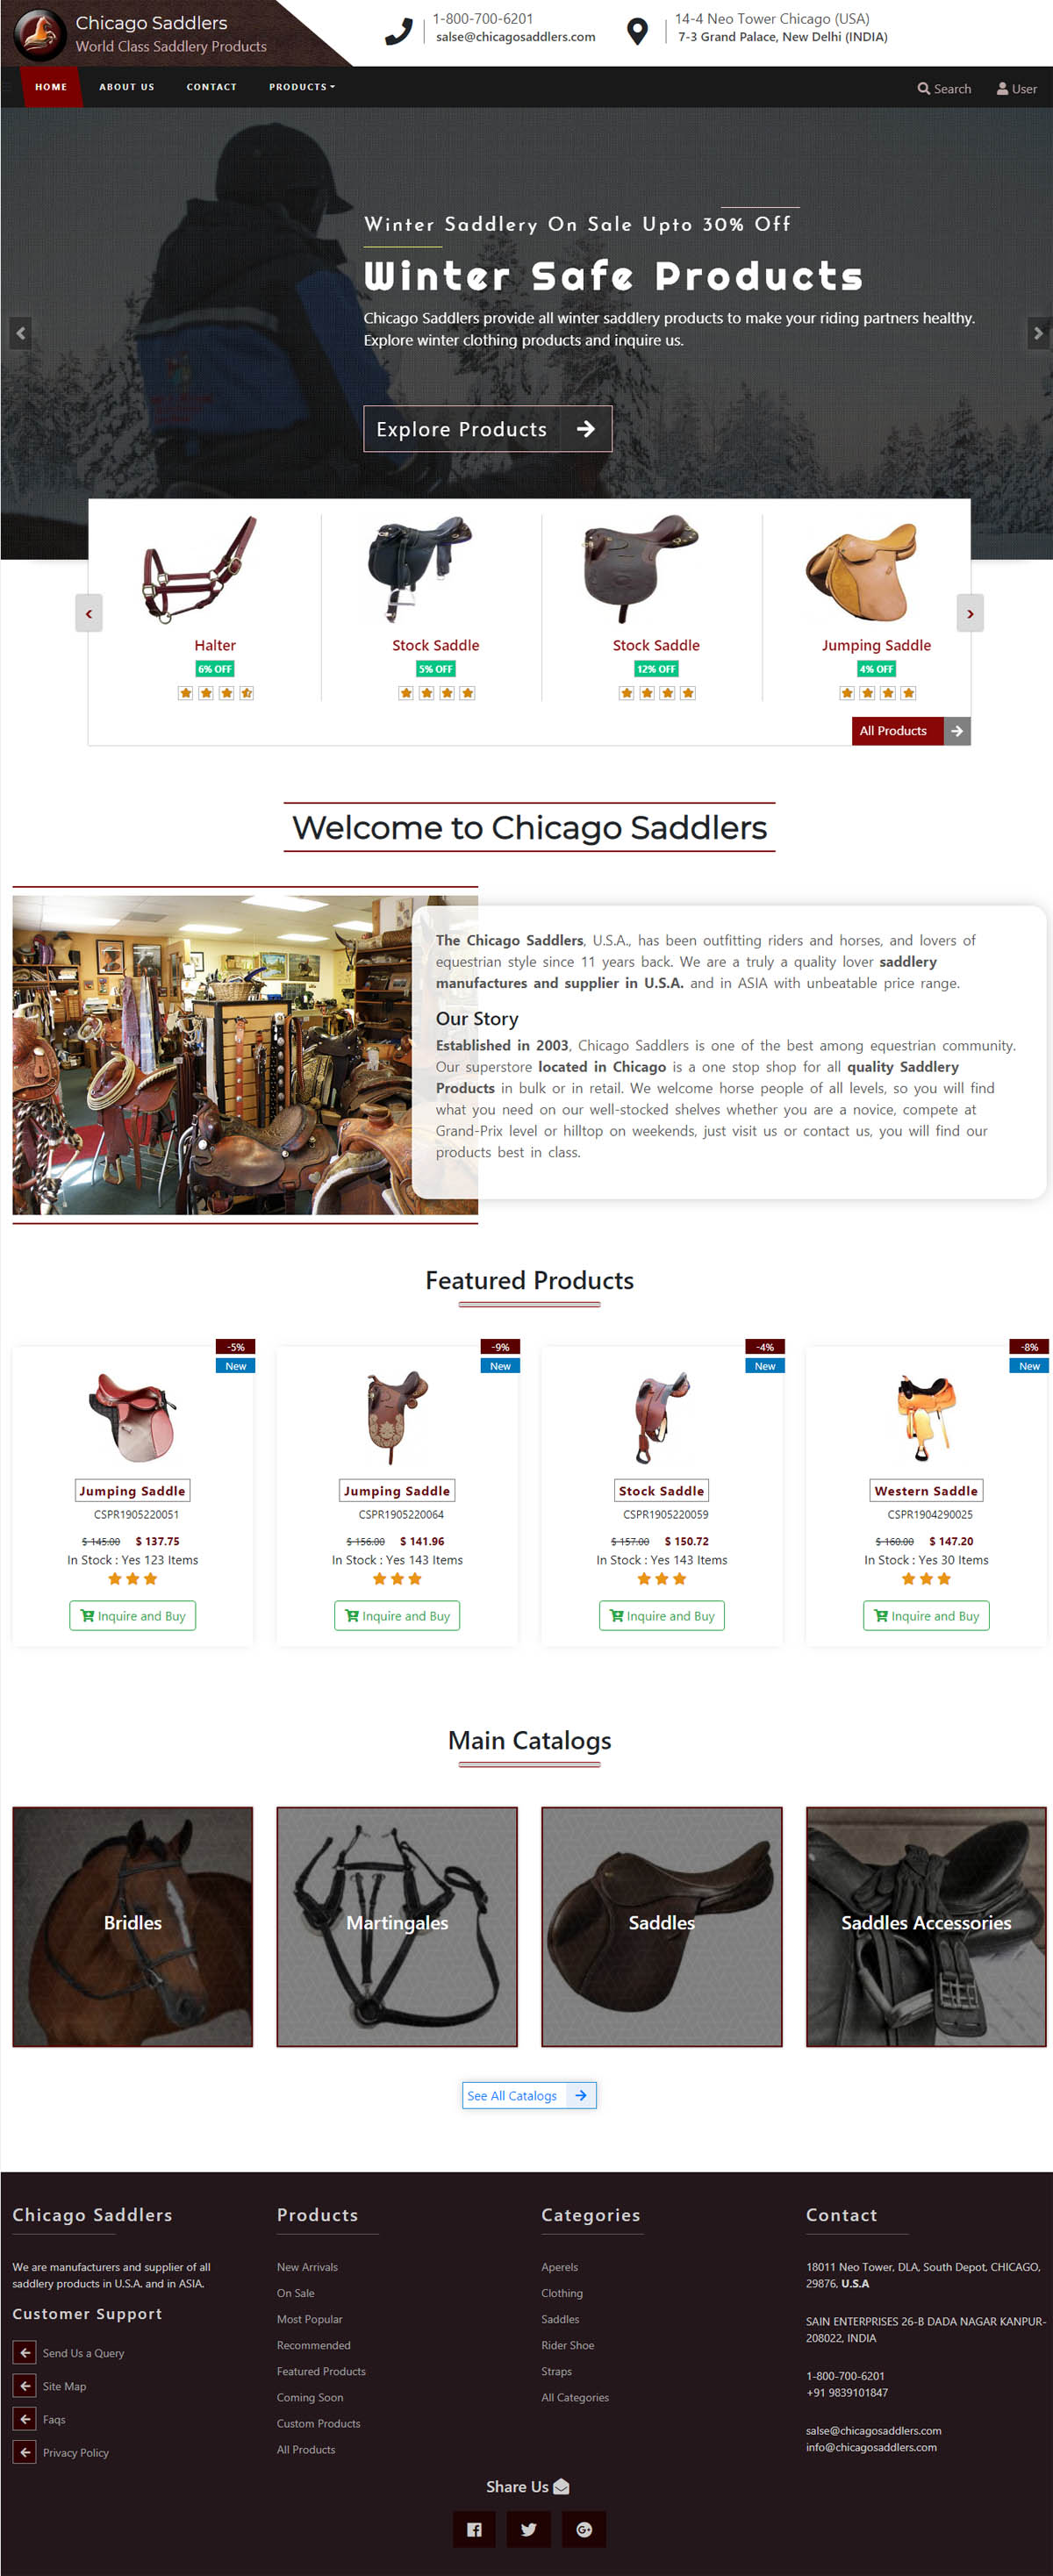 Chicago Saddlers Home Page